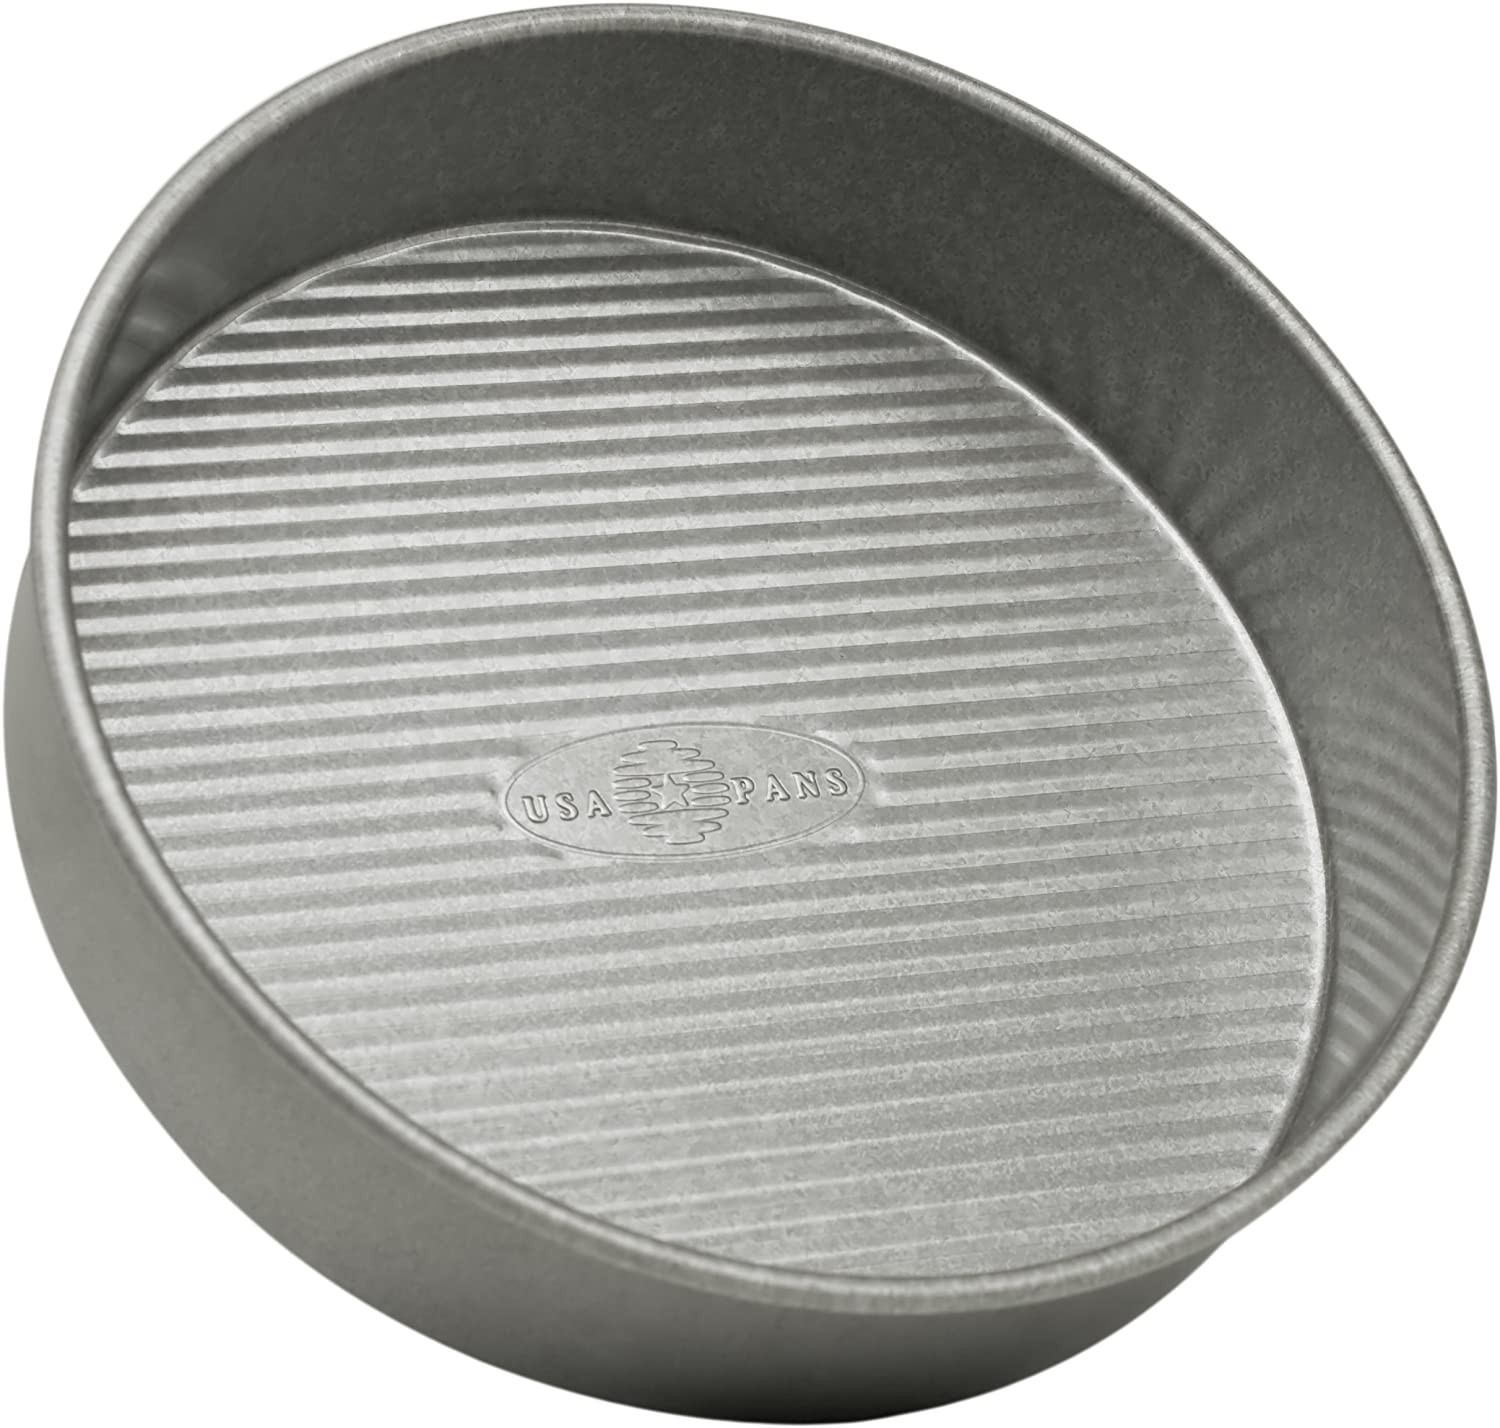 USA Pan Bakeware 1070LC Alloy Steel Round Cake Pan, 9-Inch